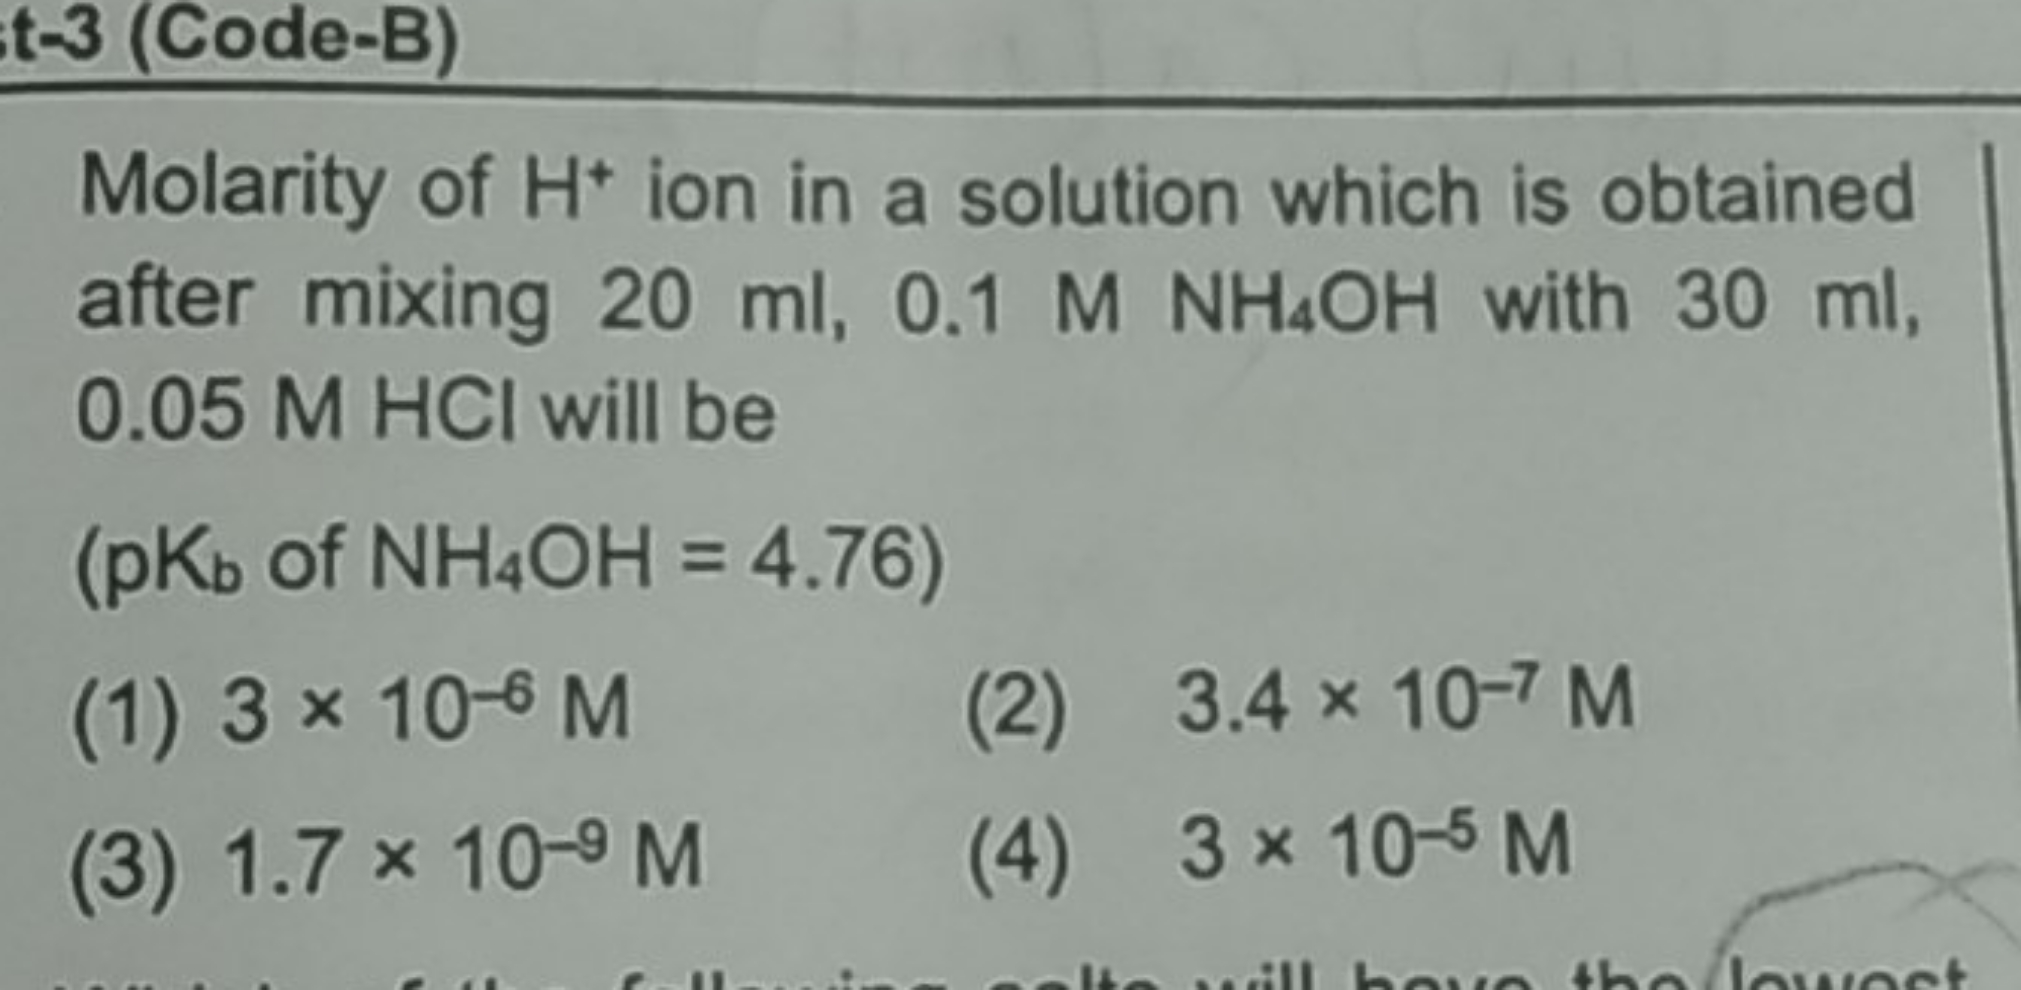 Molarity of H+ion in a solution which is obtained after mixing 20ml,0.